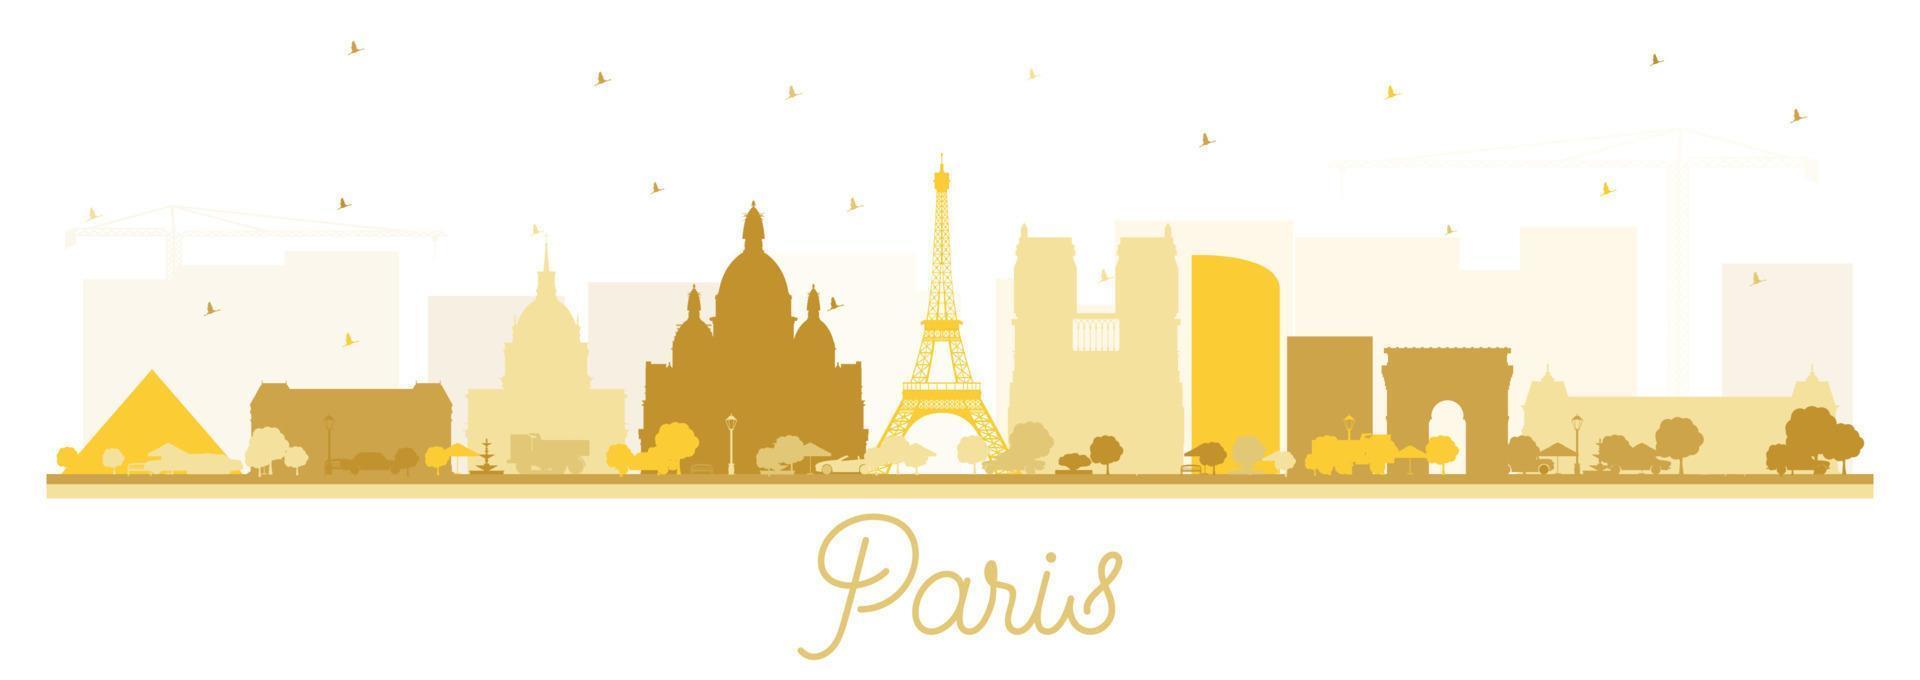 Paris France City Skyline Silhouette with Golden Buildings Isolated on White. vector